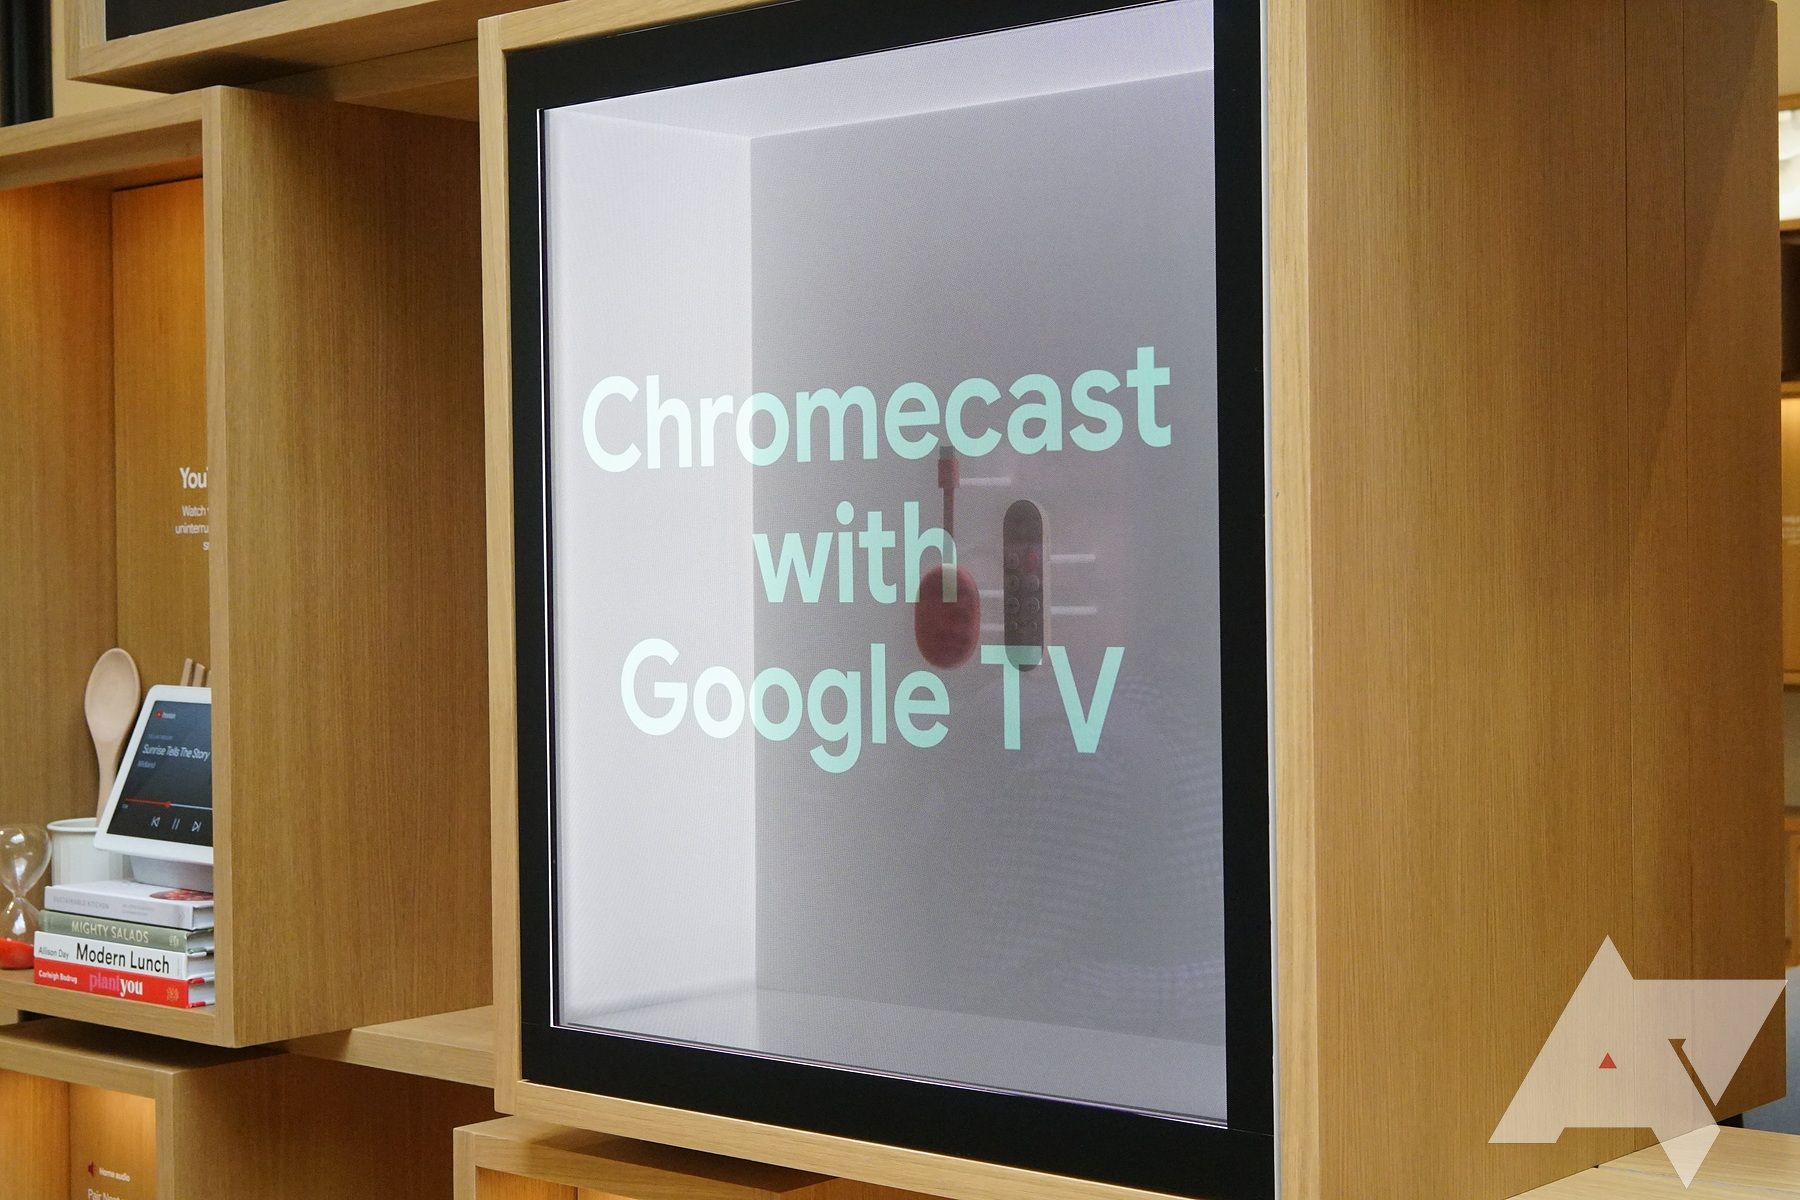 The Google store showing a Chromecast with Google TV in a transparent display